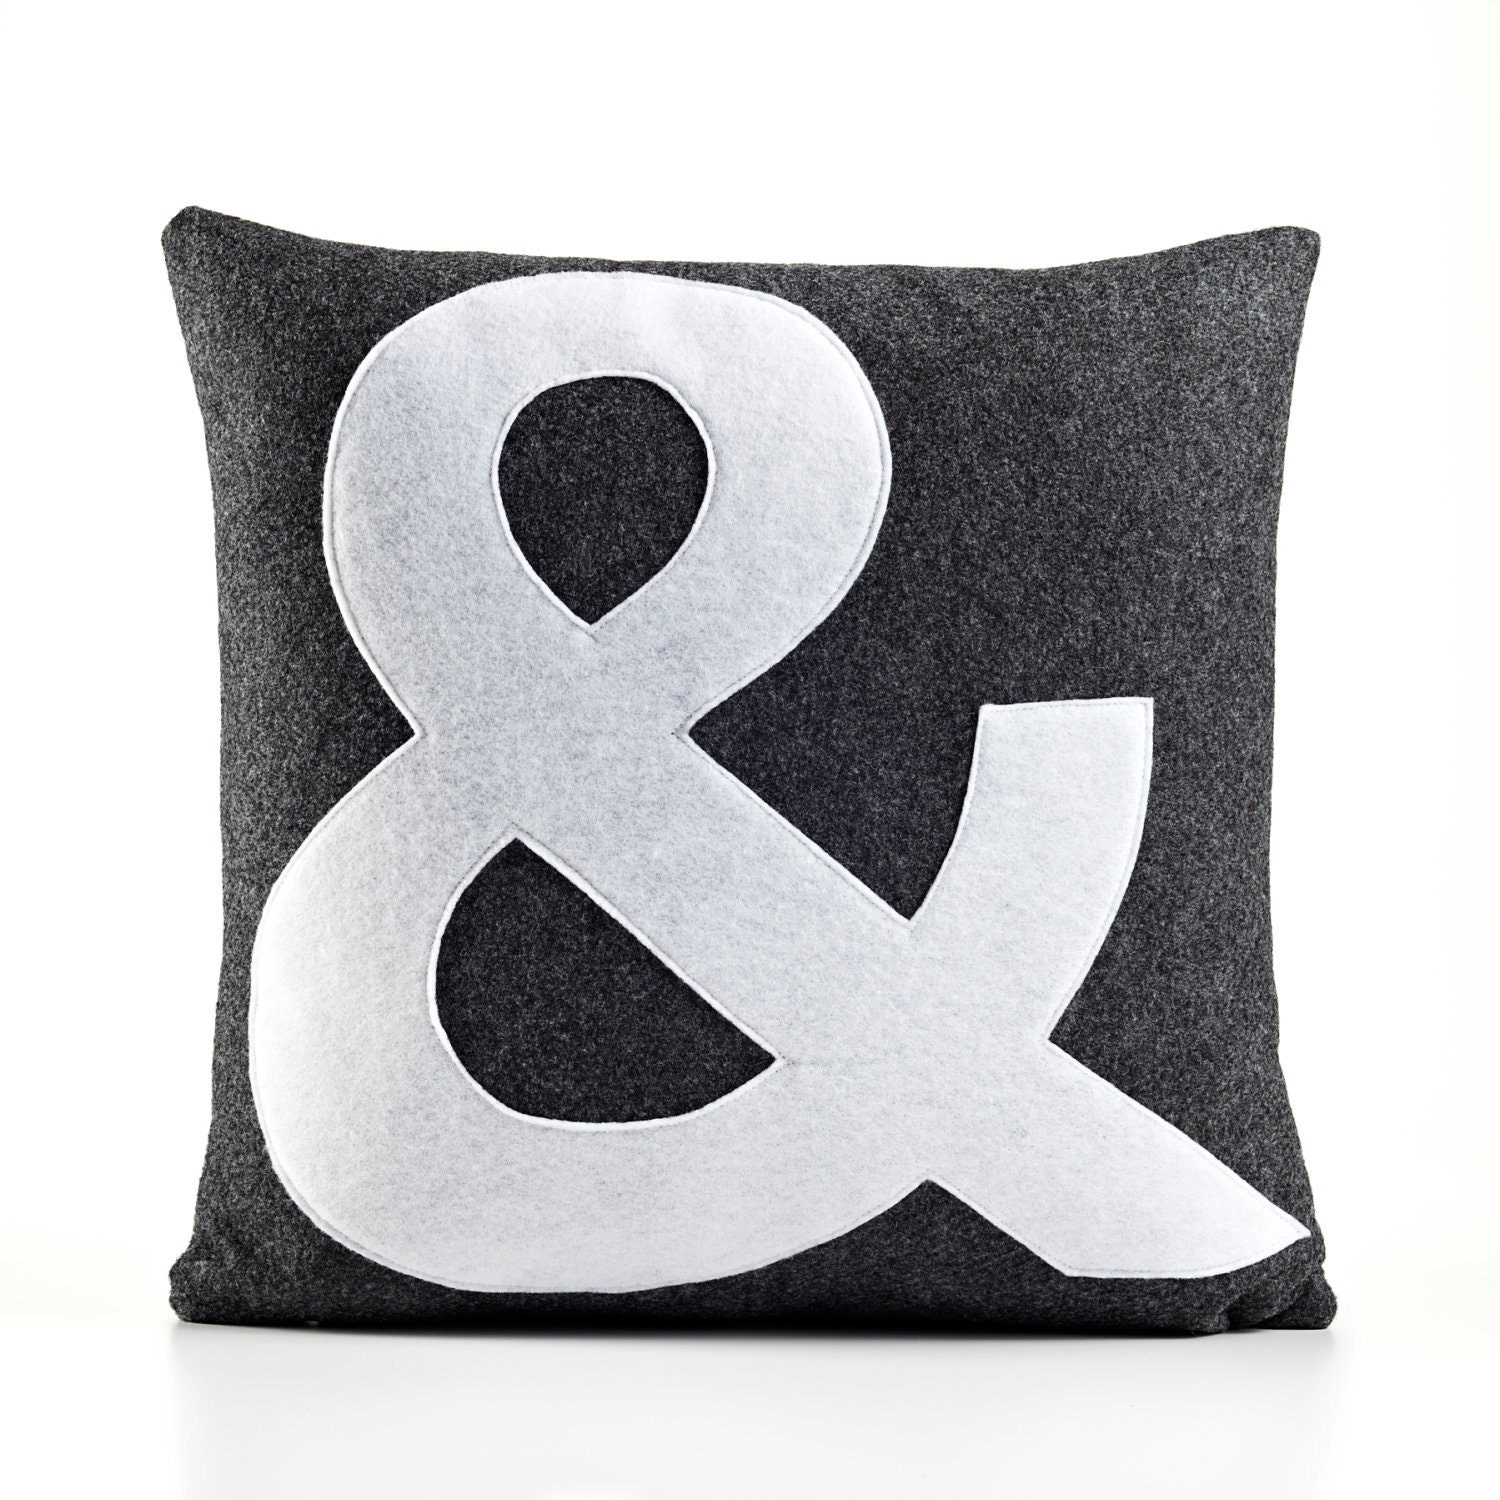 AMPERSAND block font 16x16 inch recycled felt applique pillow - oatmeal and red